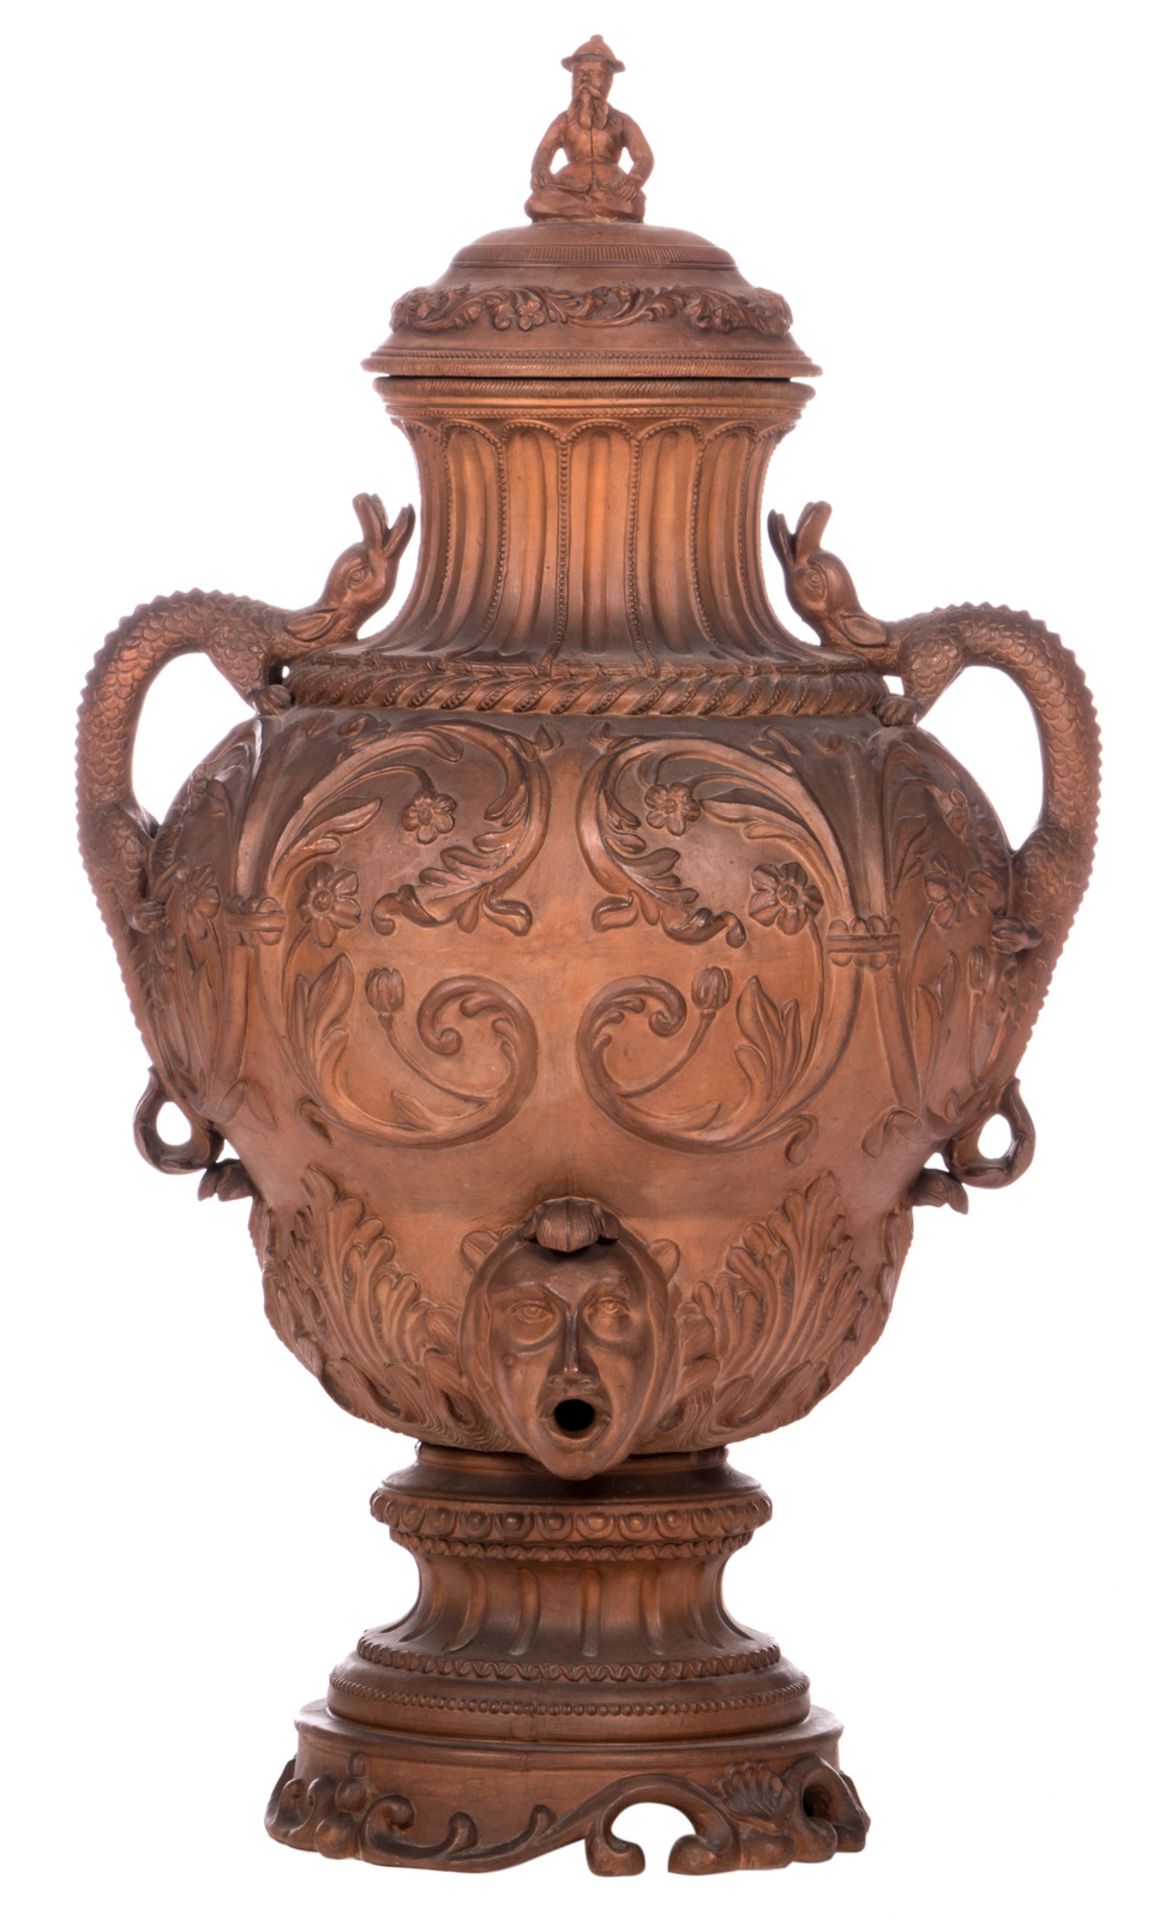 A terracotta wine fountain, overall decorated with Renaissance ornamental motives and on top a